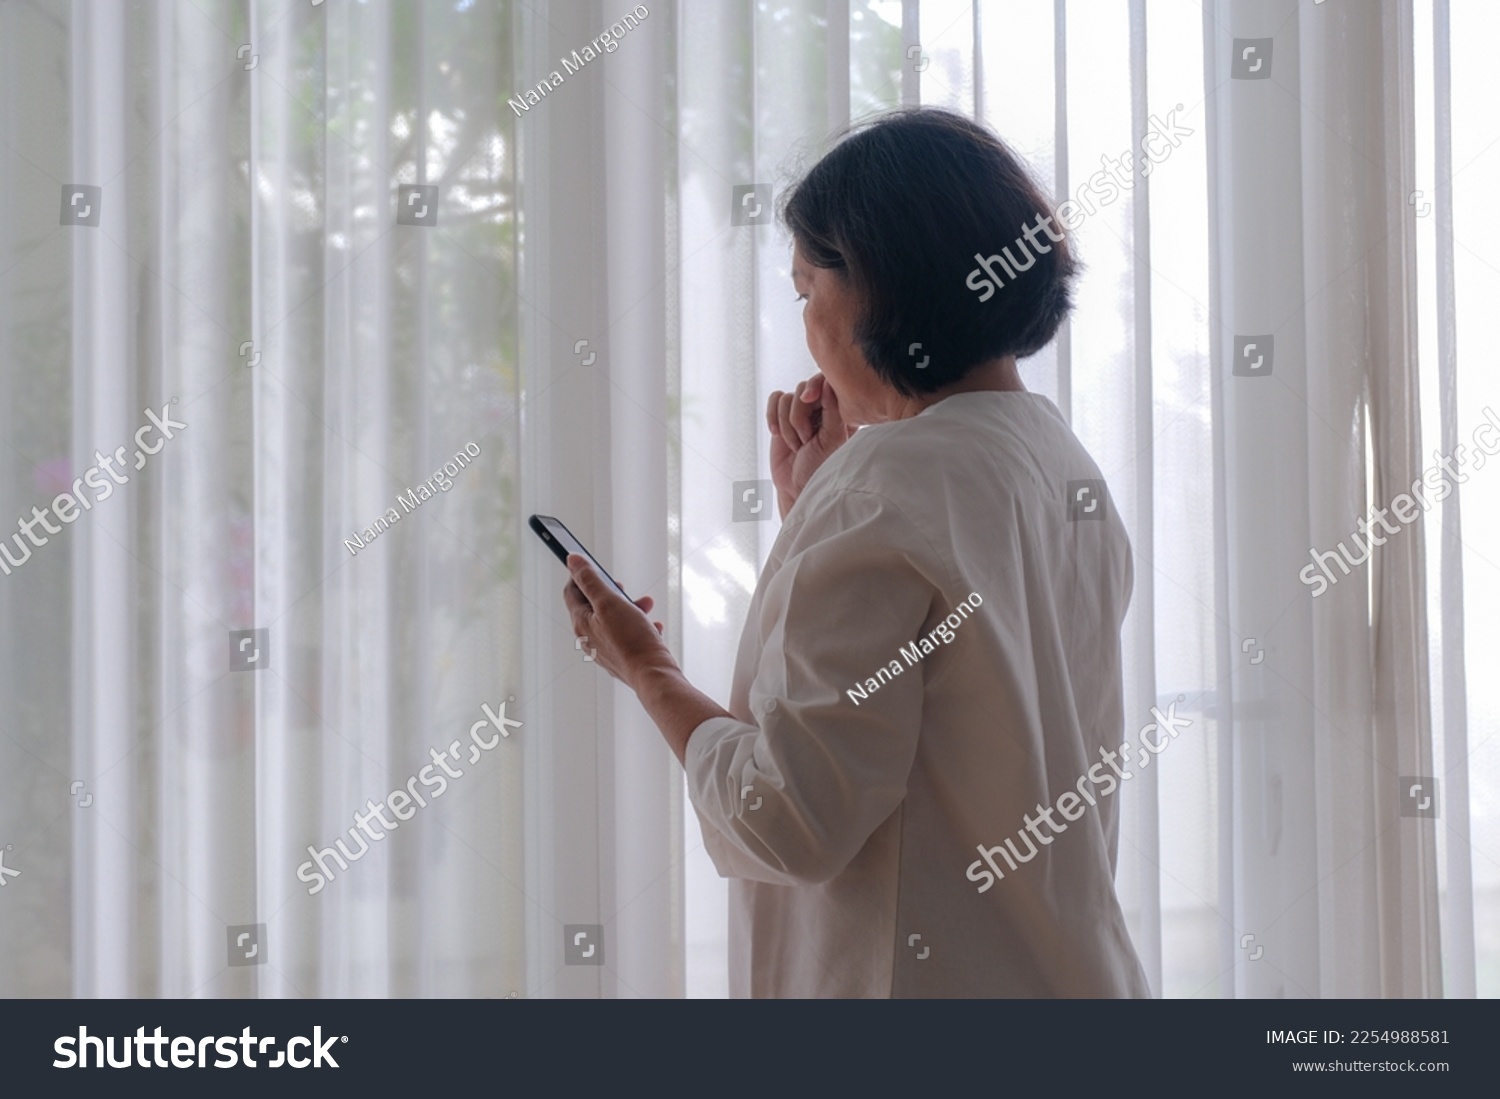 Back view: A woman holding a cell phone standing near the window; biting nails. #2254988581